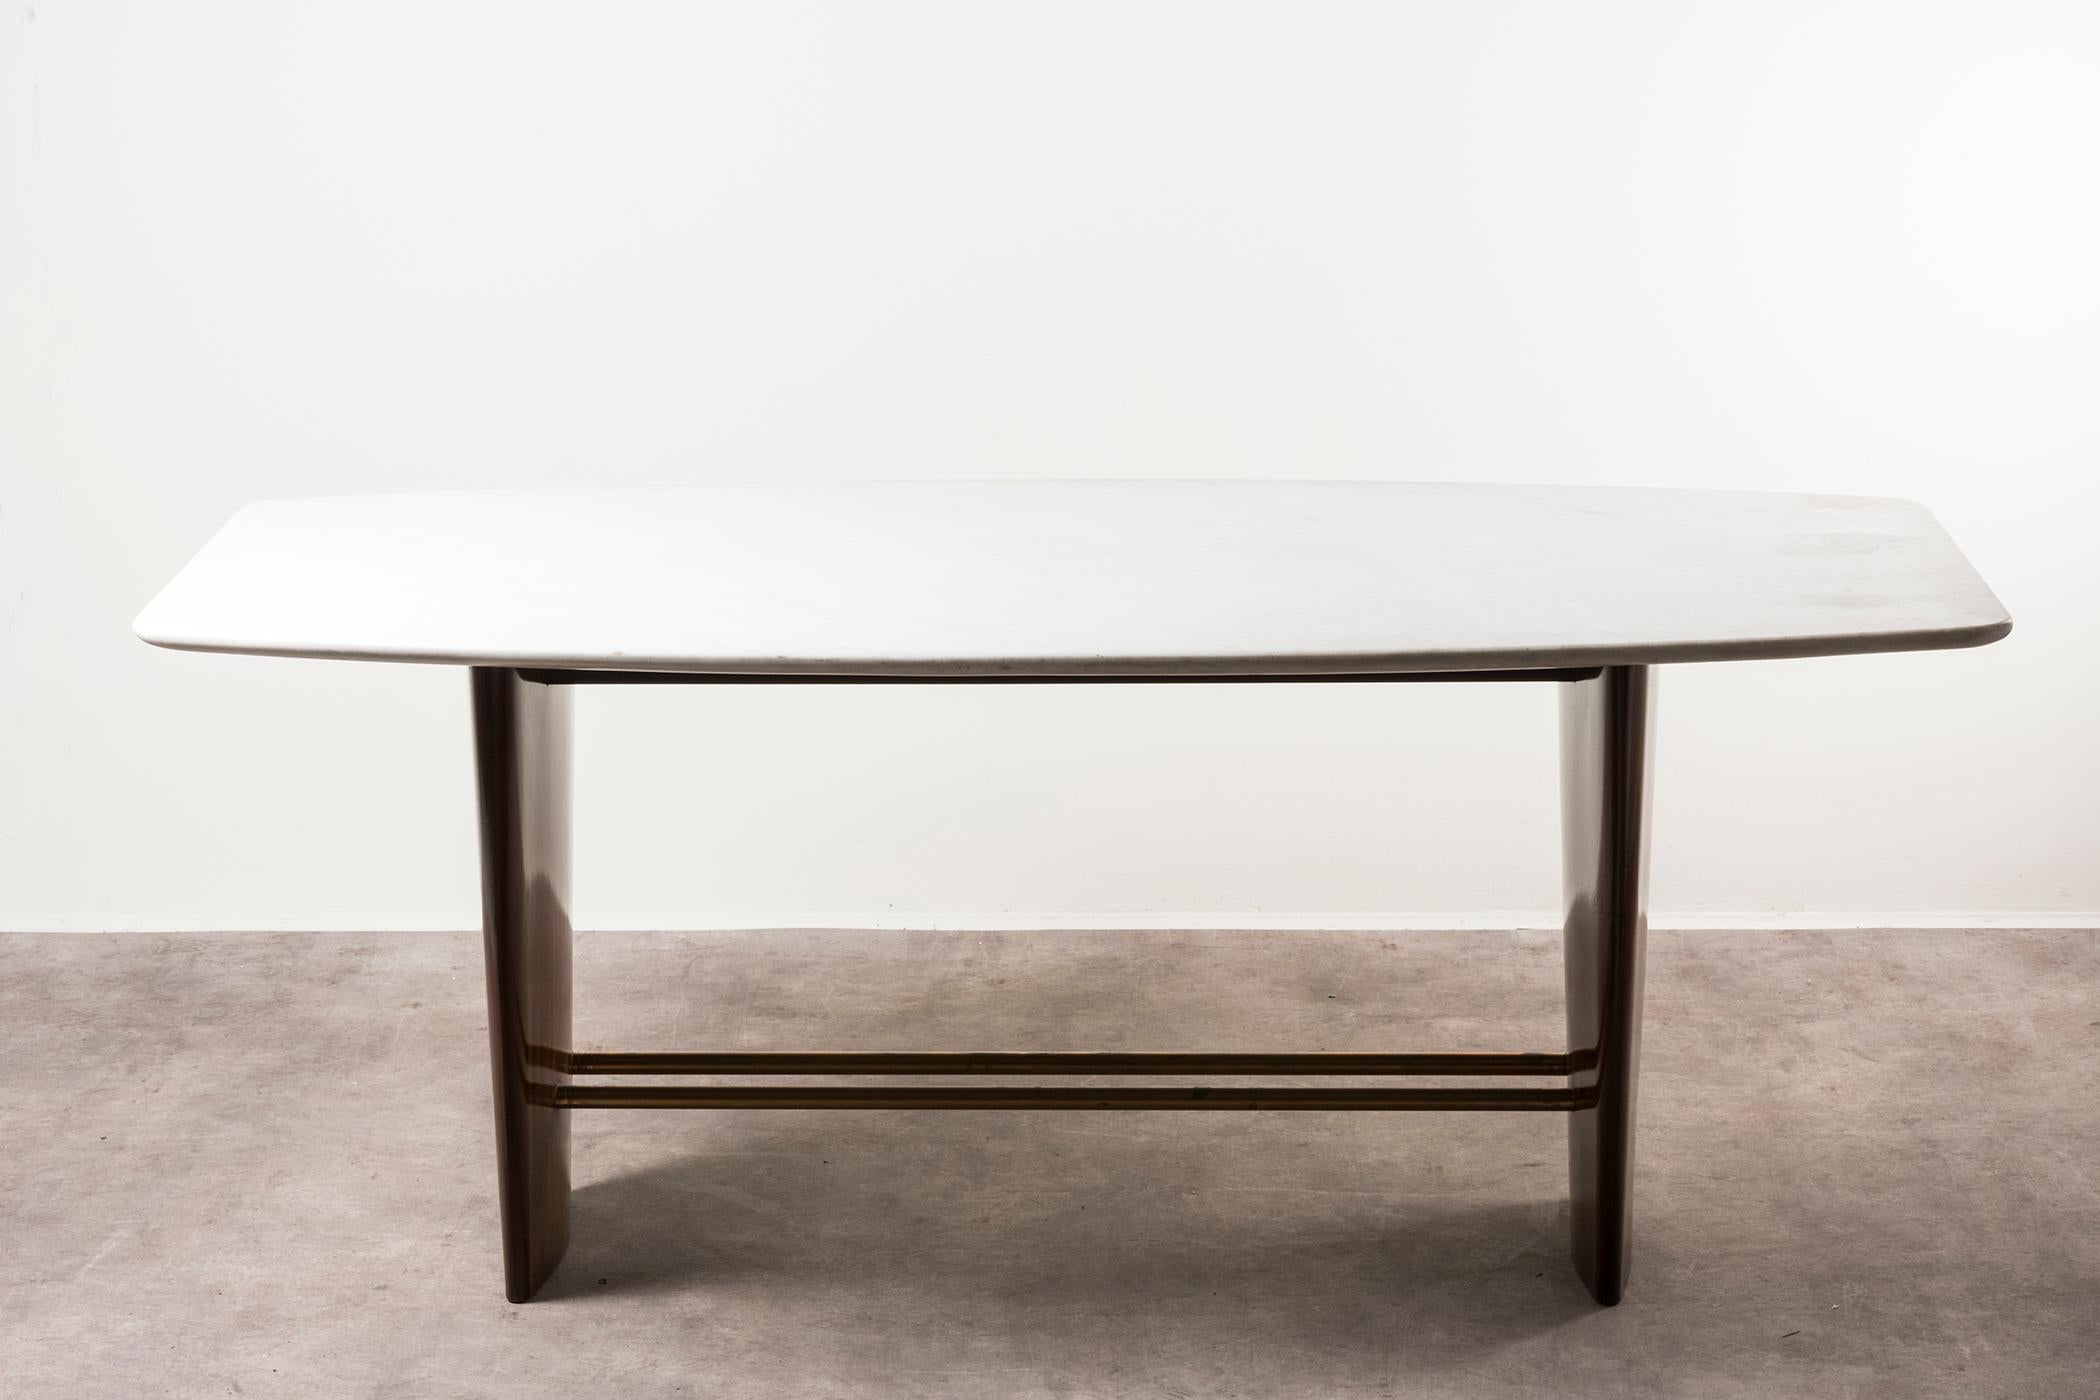 Table by Joaquim Tenreiro, Brazil, 1960. Wood, brass, marble. Measures: 90 x 187 x H 75 cm. 35.4 x 73.6 x H 29.5 in.
Please note: Prices do not include VAT. VAT may be applied depending on the ship-to location.
The product shows scratches and stains.